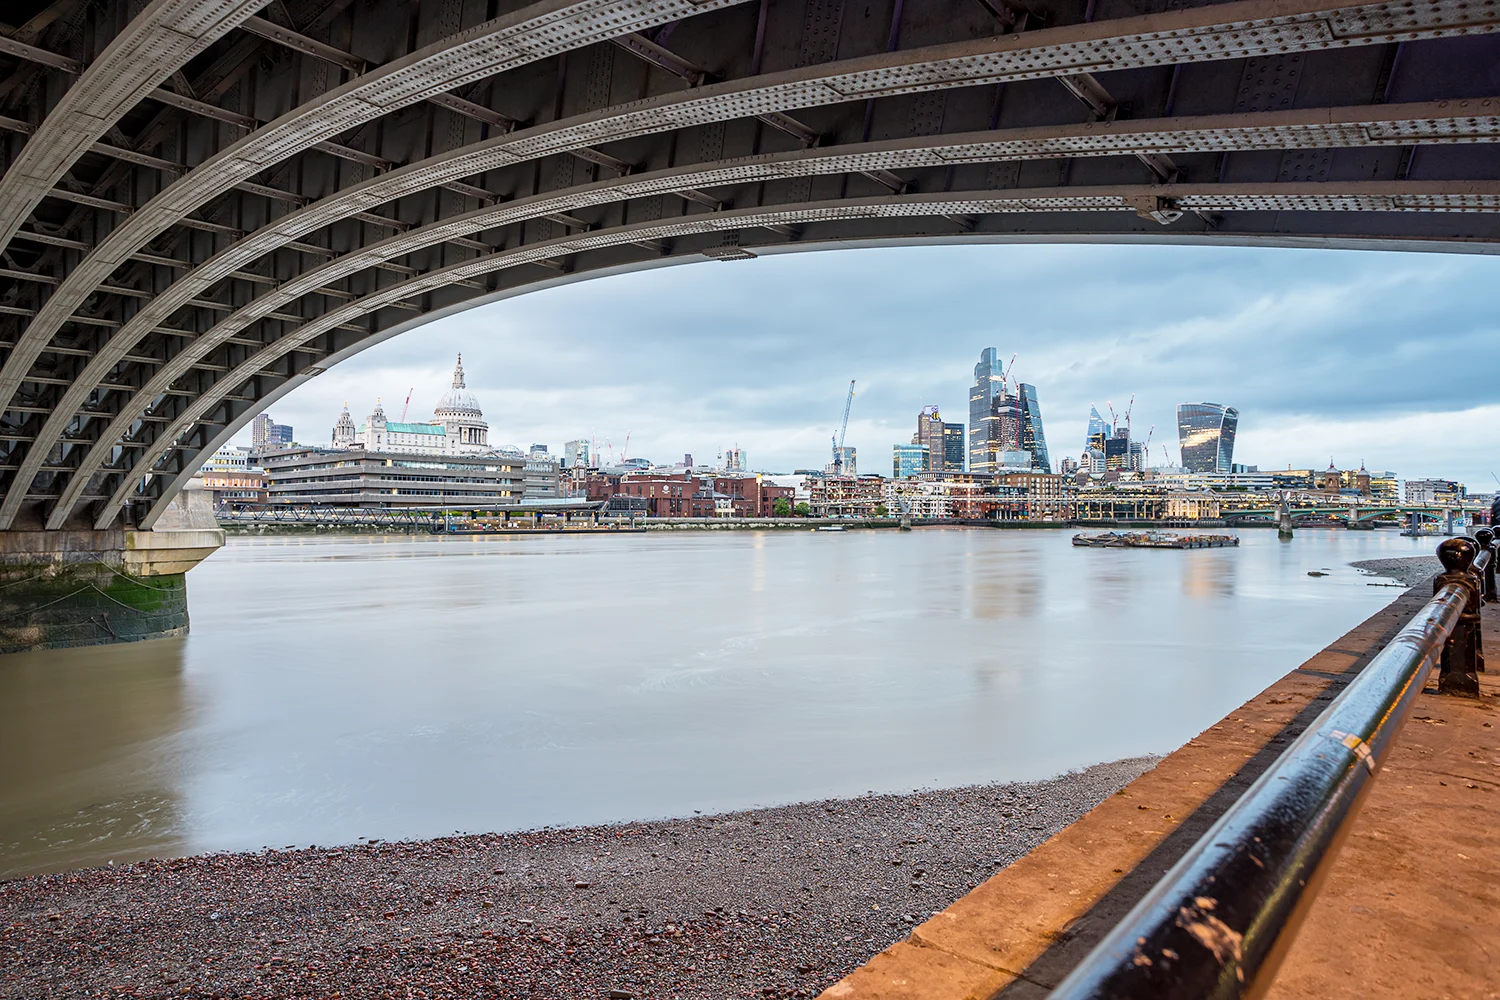 The view looking east down the Thames from under Blackfriars bridge, with St Paul's Cathedral and Canary Wharf visible in the background.